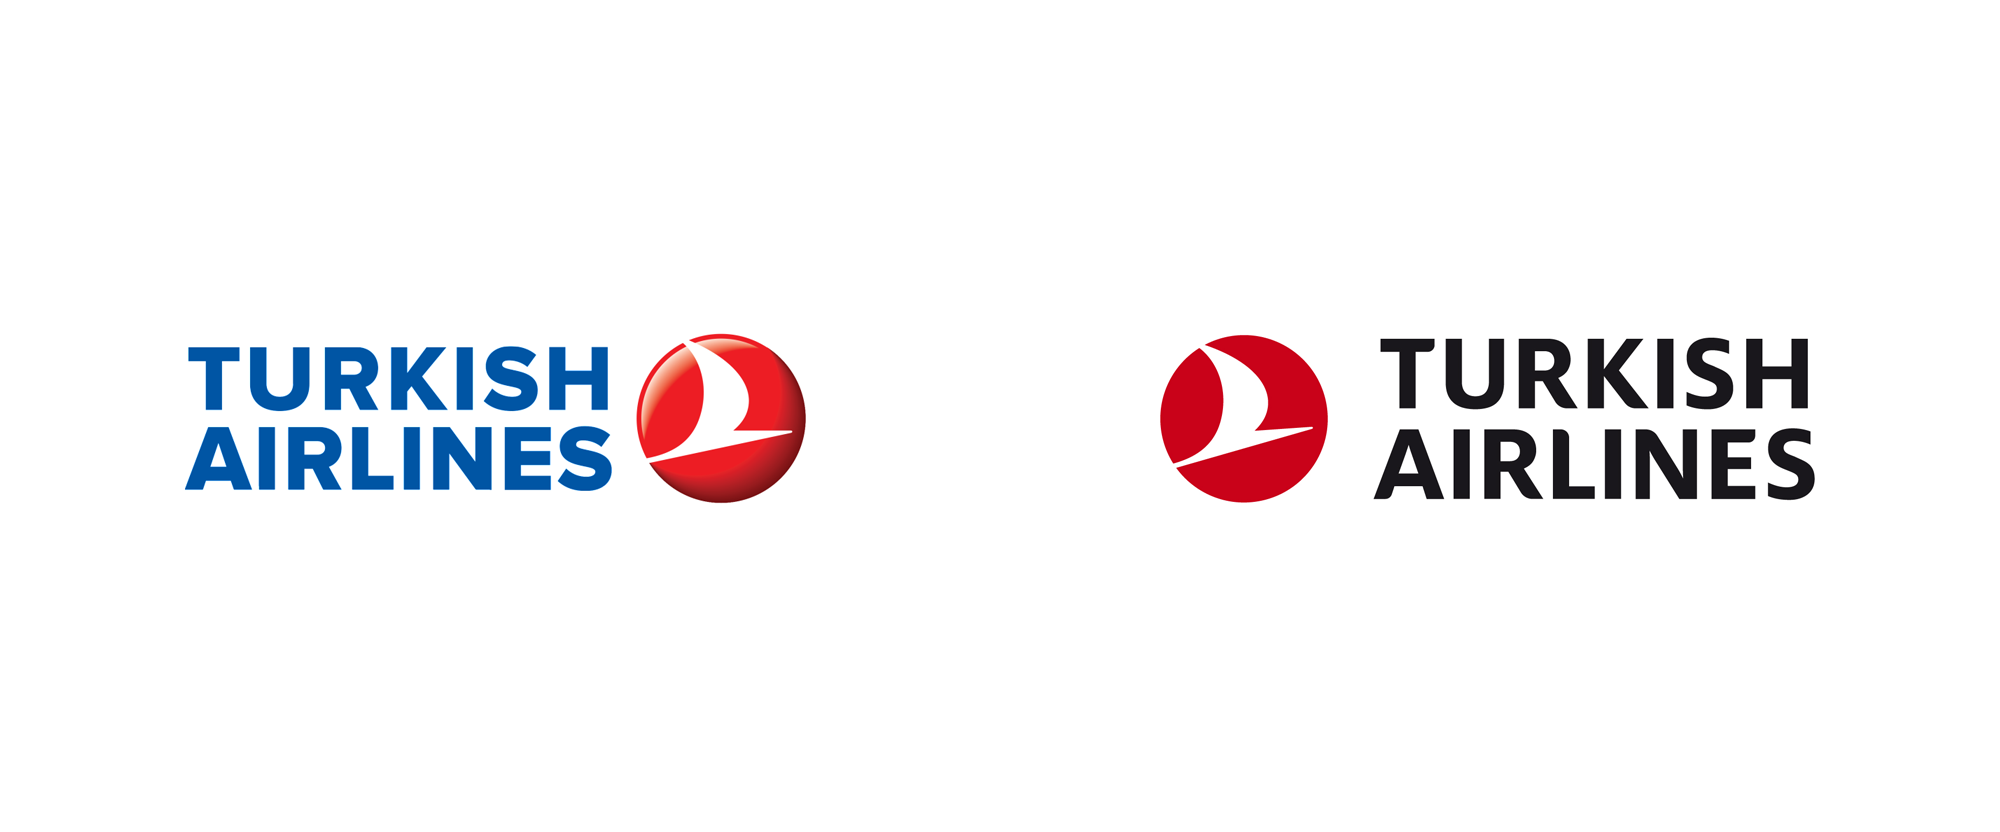 Turkish Airlines Logo PNG - 176019